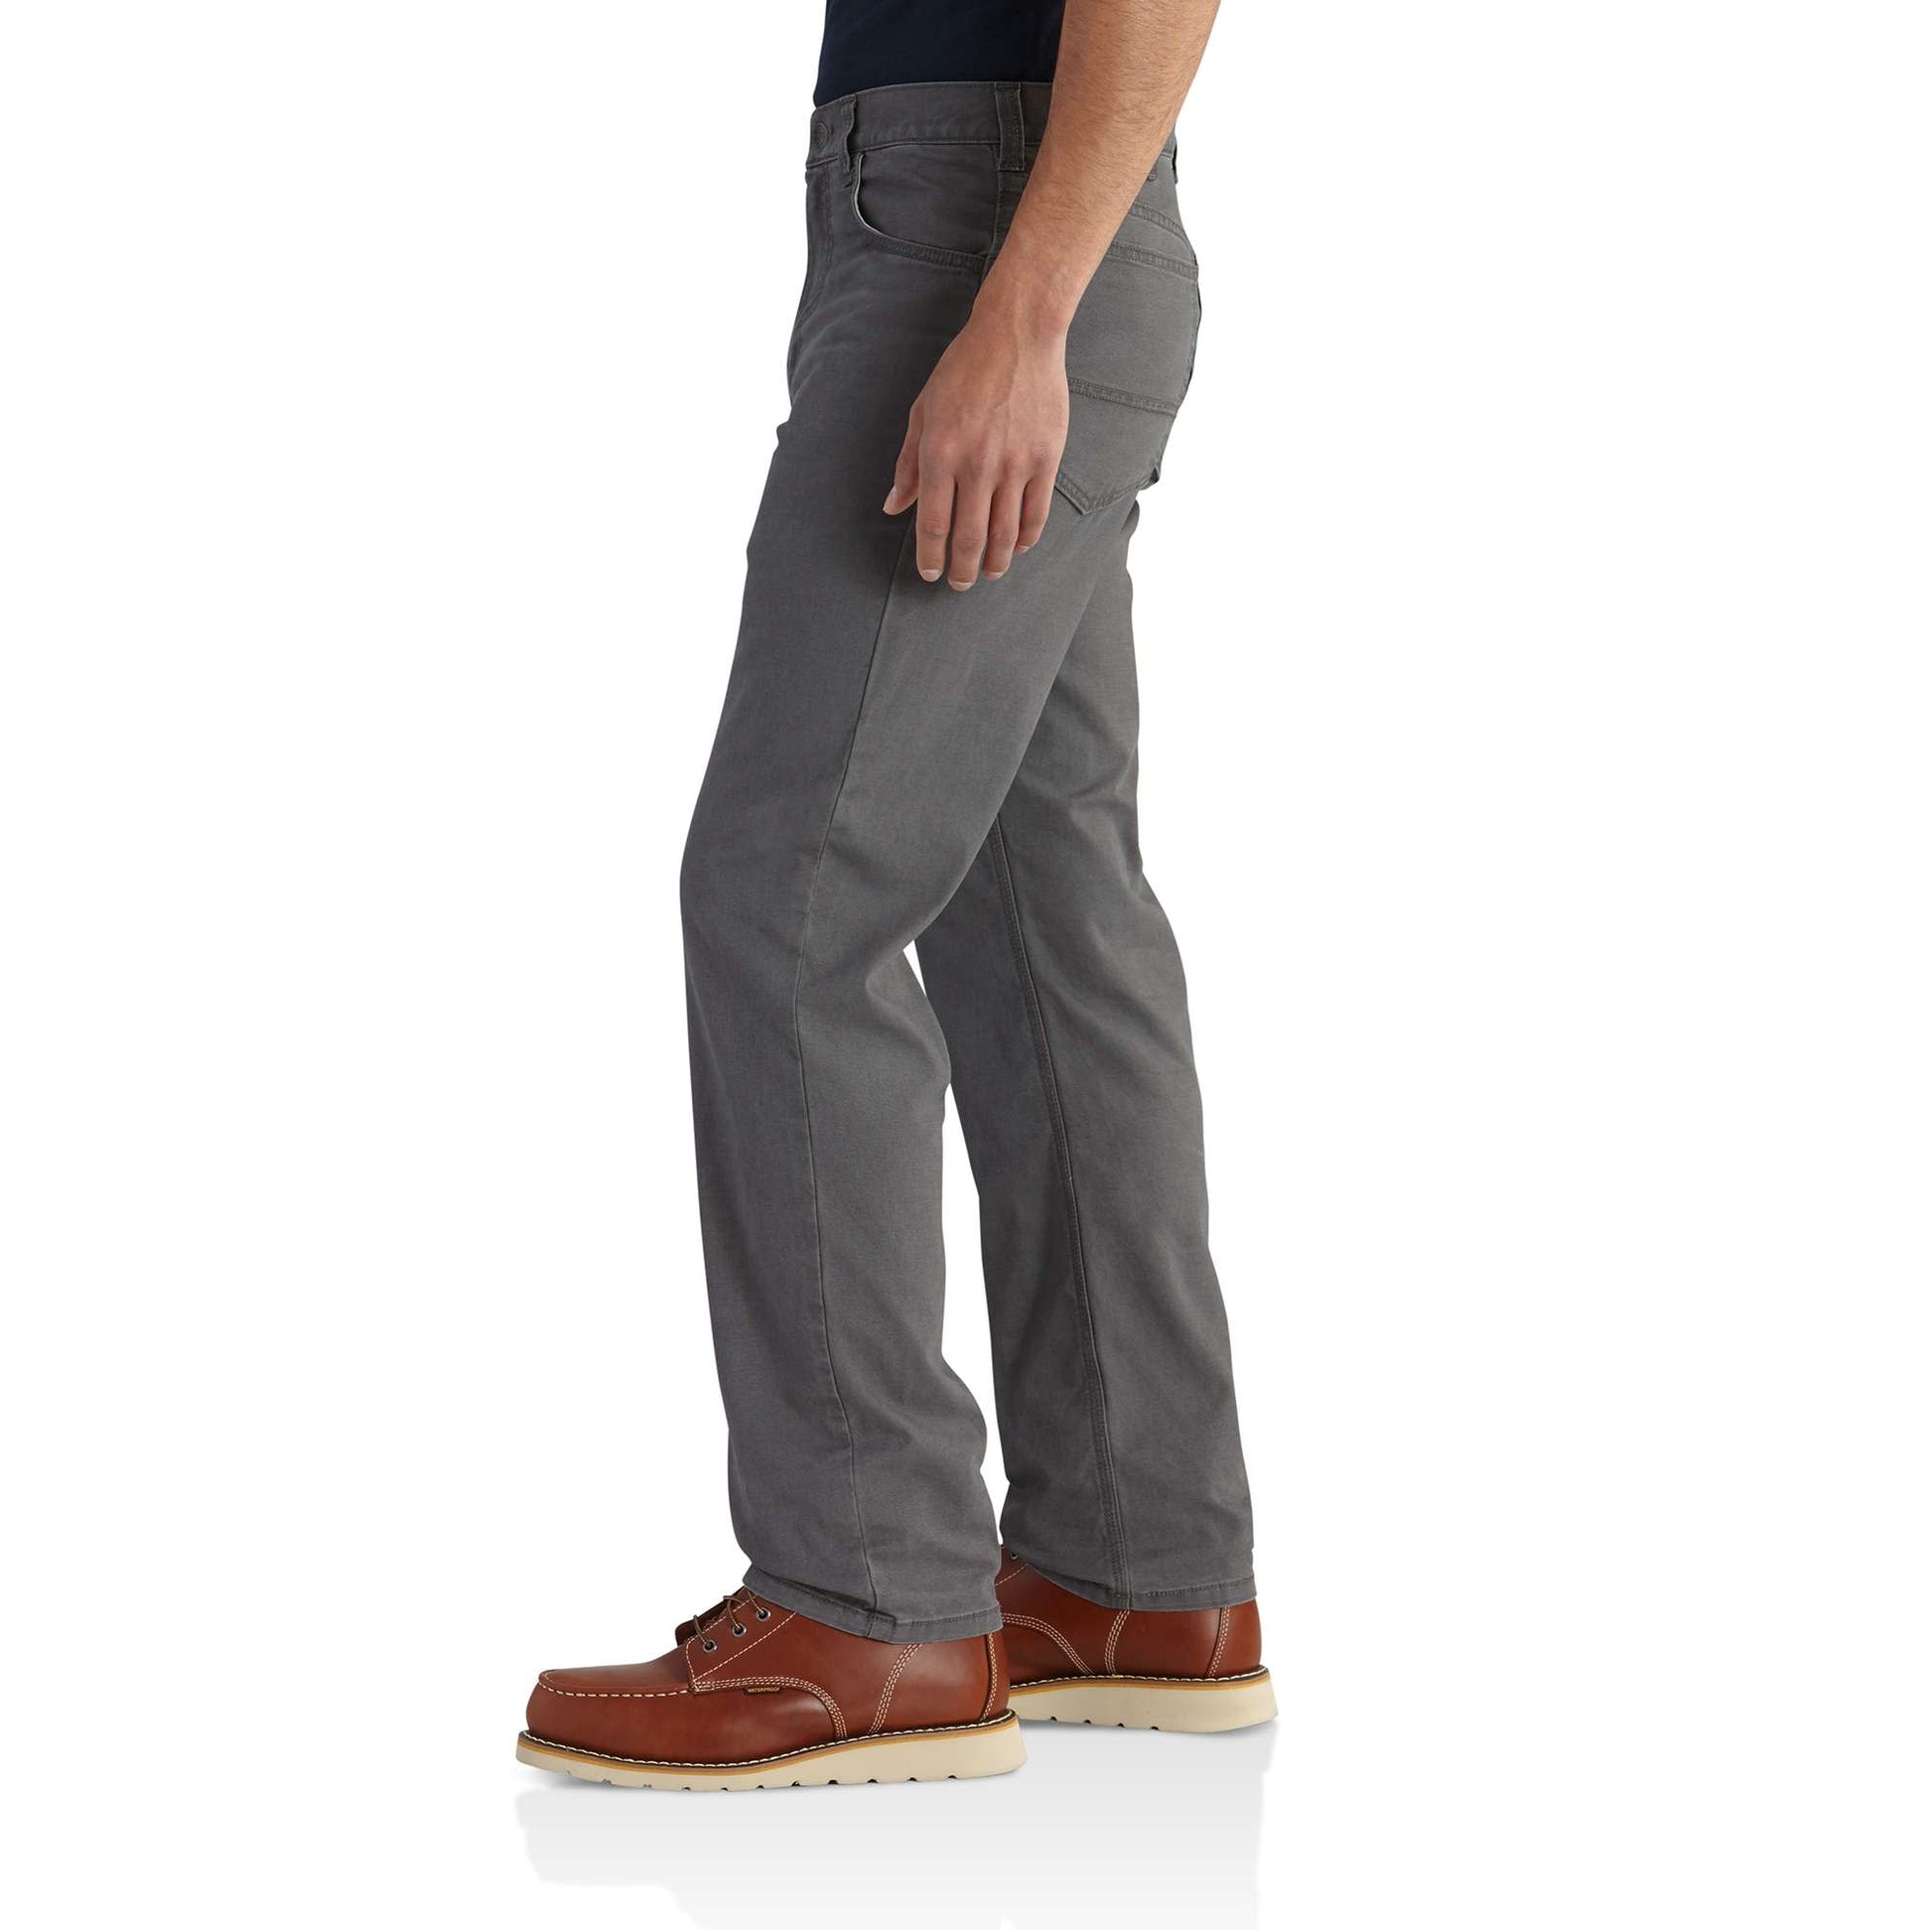 Carhartt Work Pants Rugged Flex Relaxed Fit Mens Canvas 5 Pocket Gray 54×30